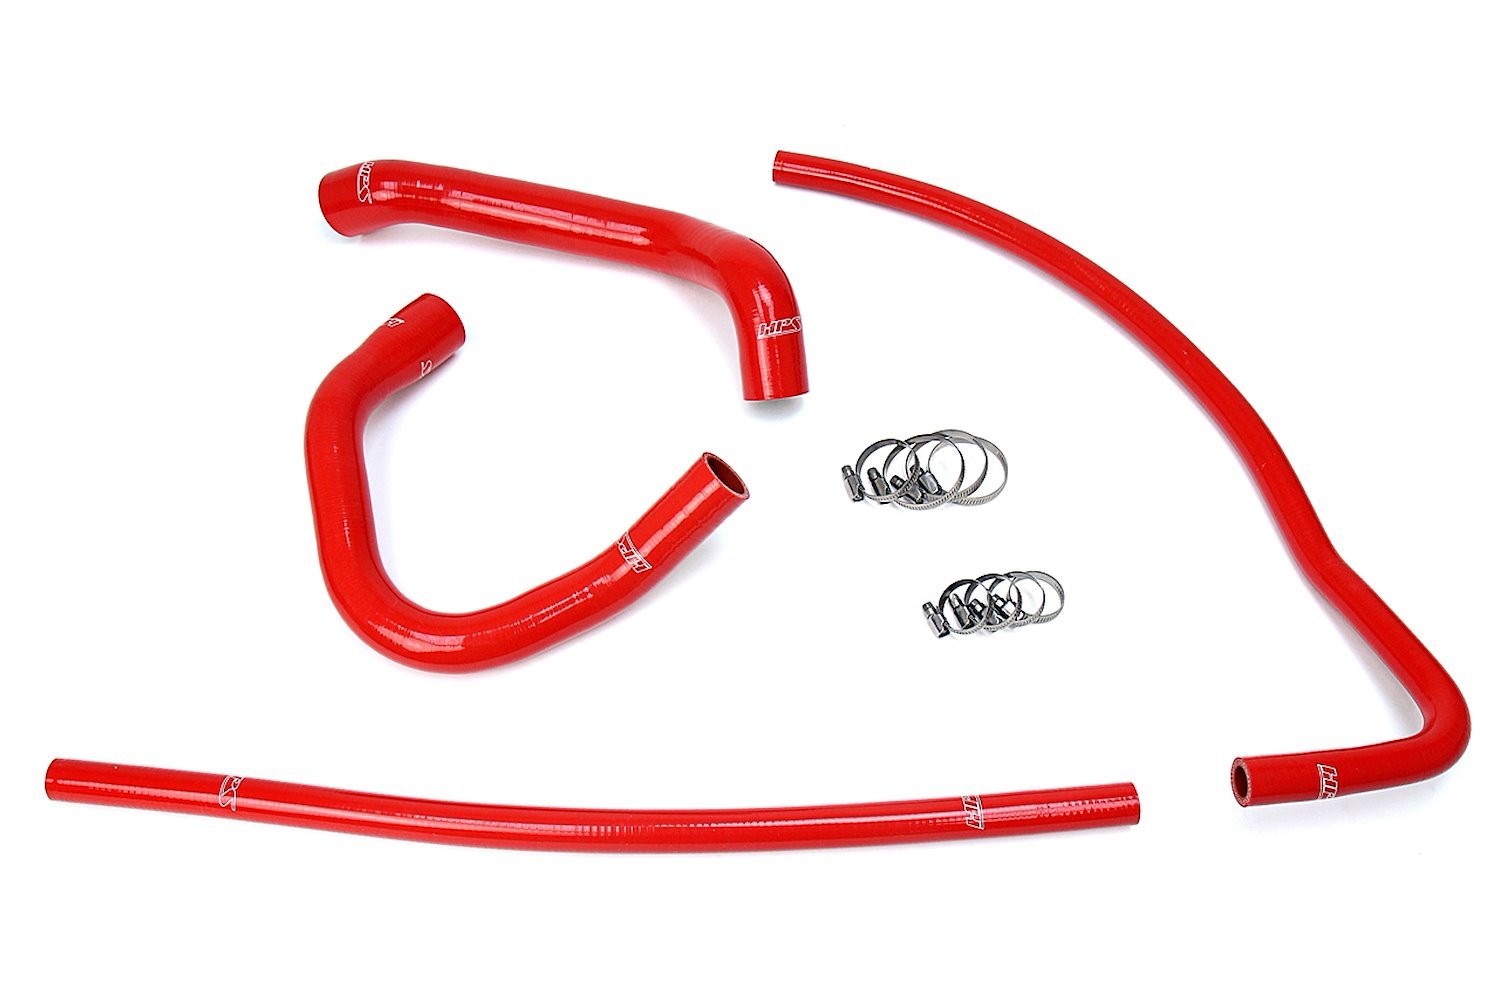 57-1690-RED Coolant Hose Kit, High-Temp 3-Ply Reinforced Silicone, Replace Rubber Radiator Heater Coolant Hoses